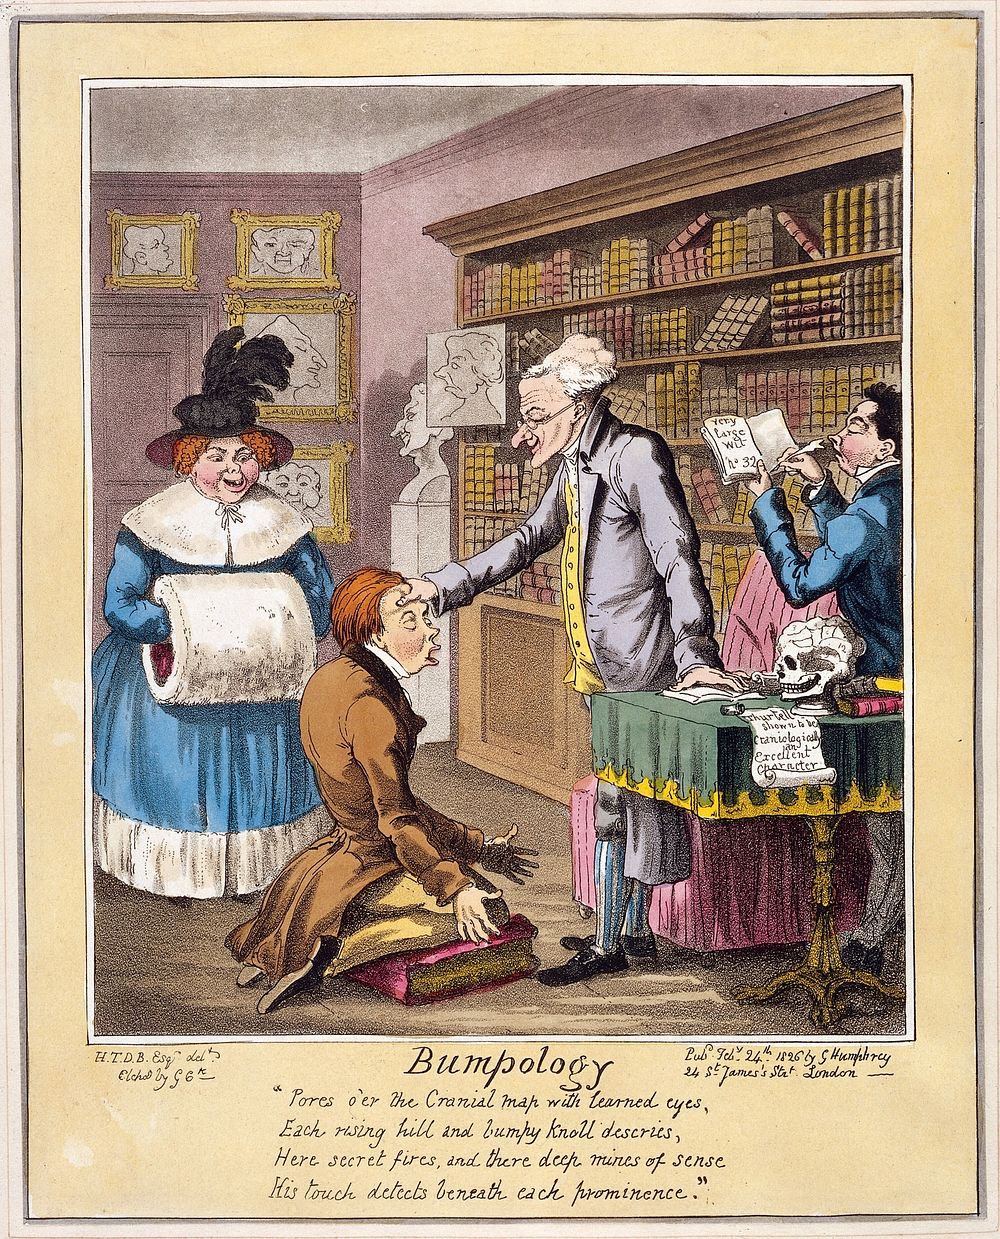 A phrenologist in his consulting room, examining the head of a young man and dictating the results to his assistant while a…